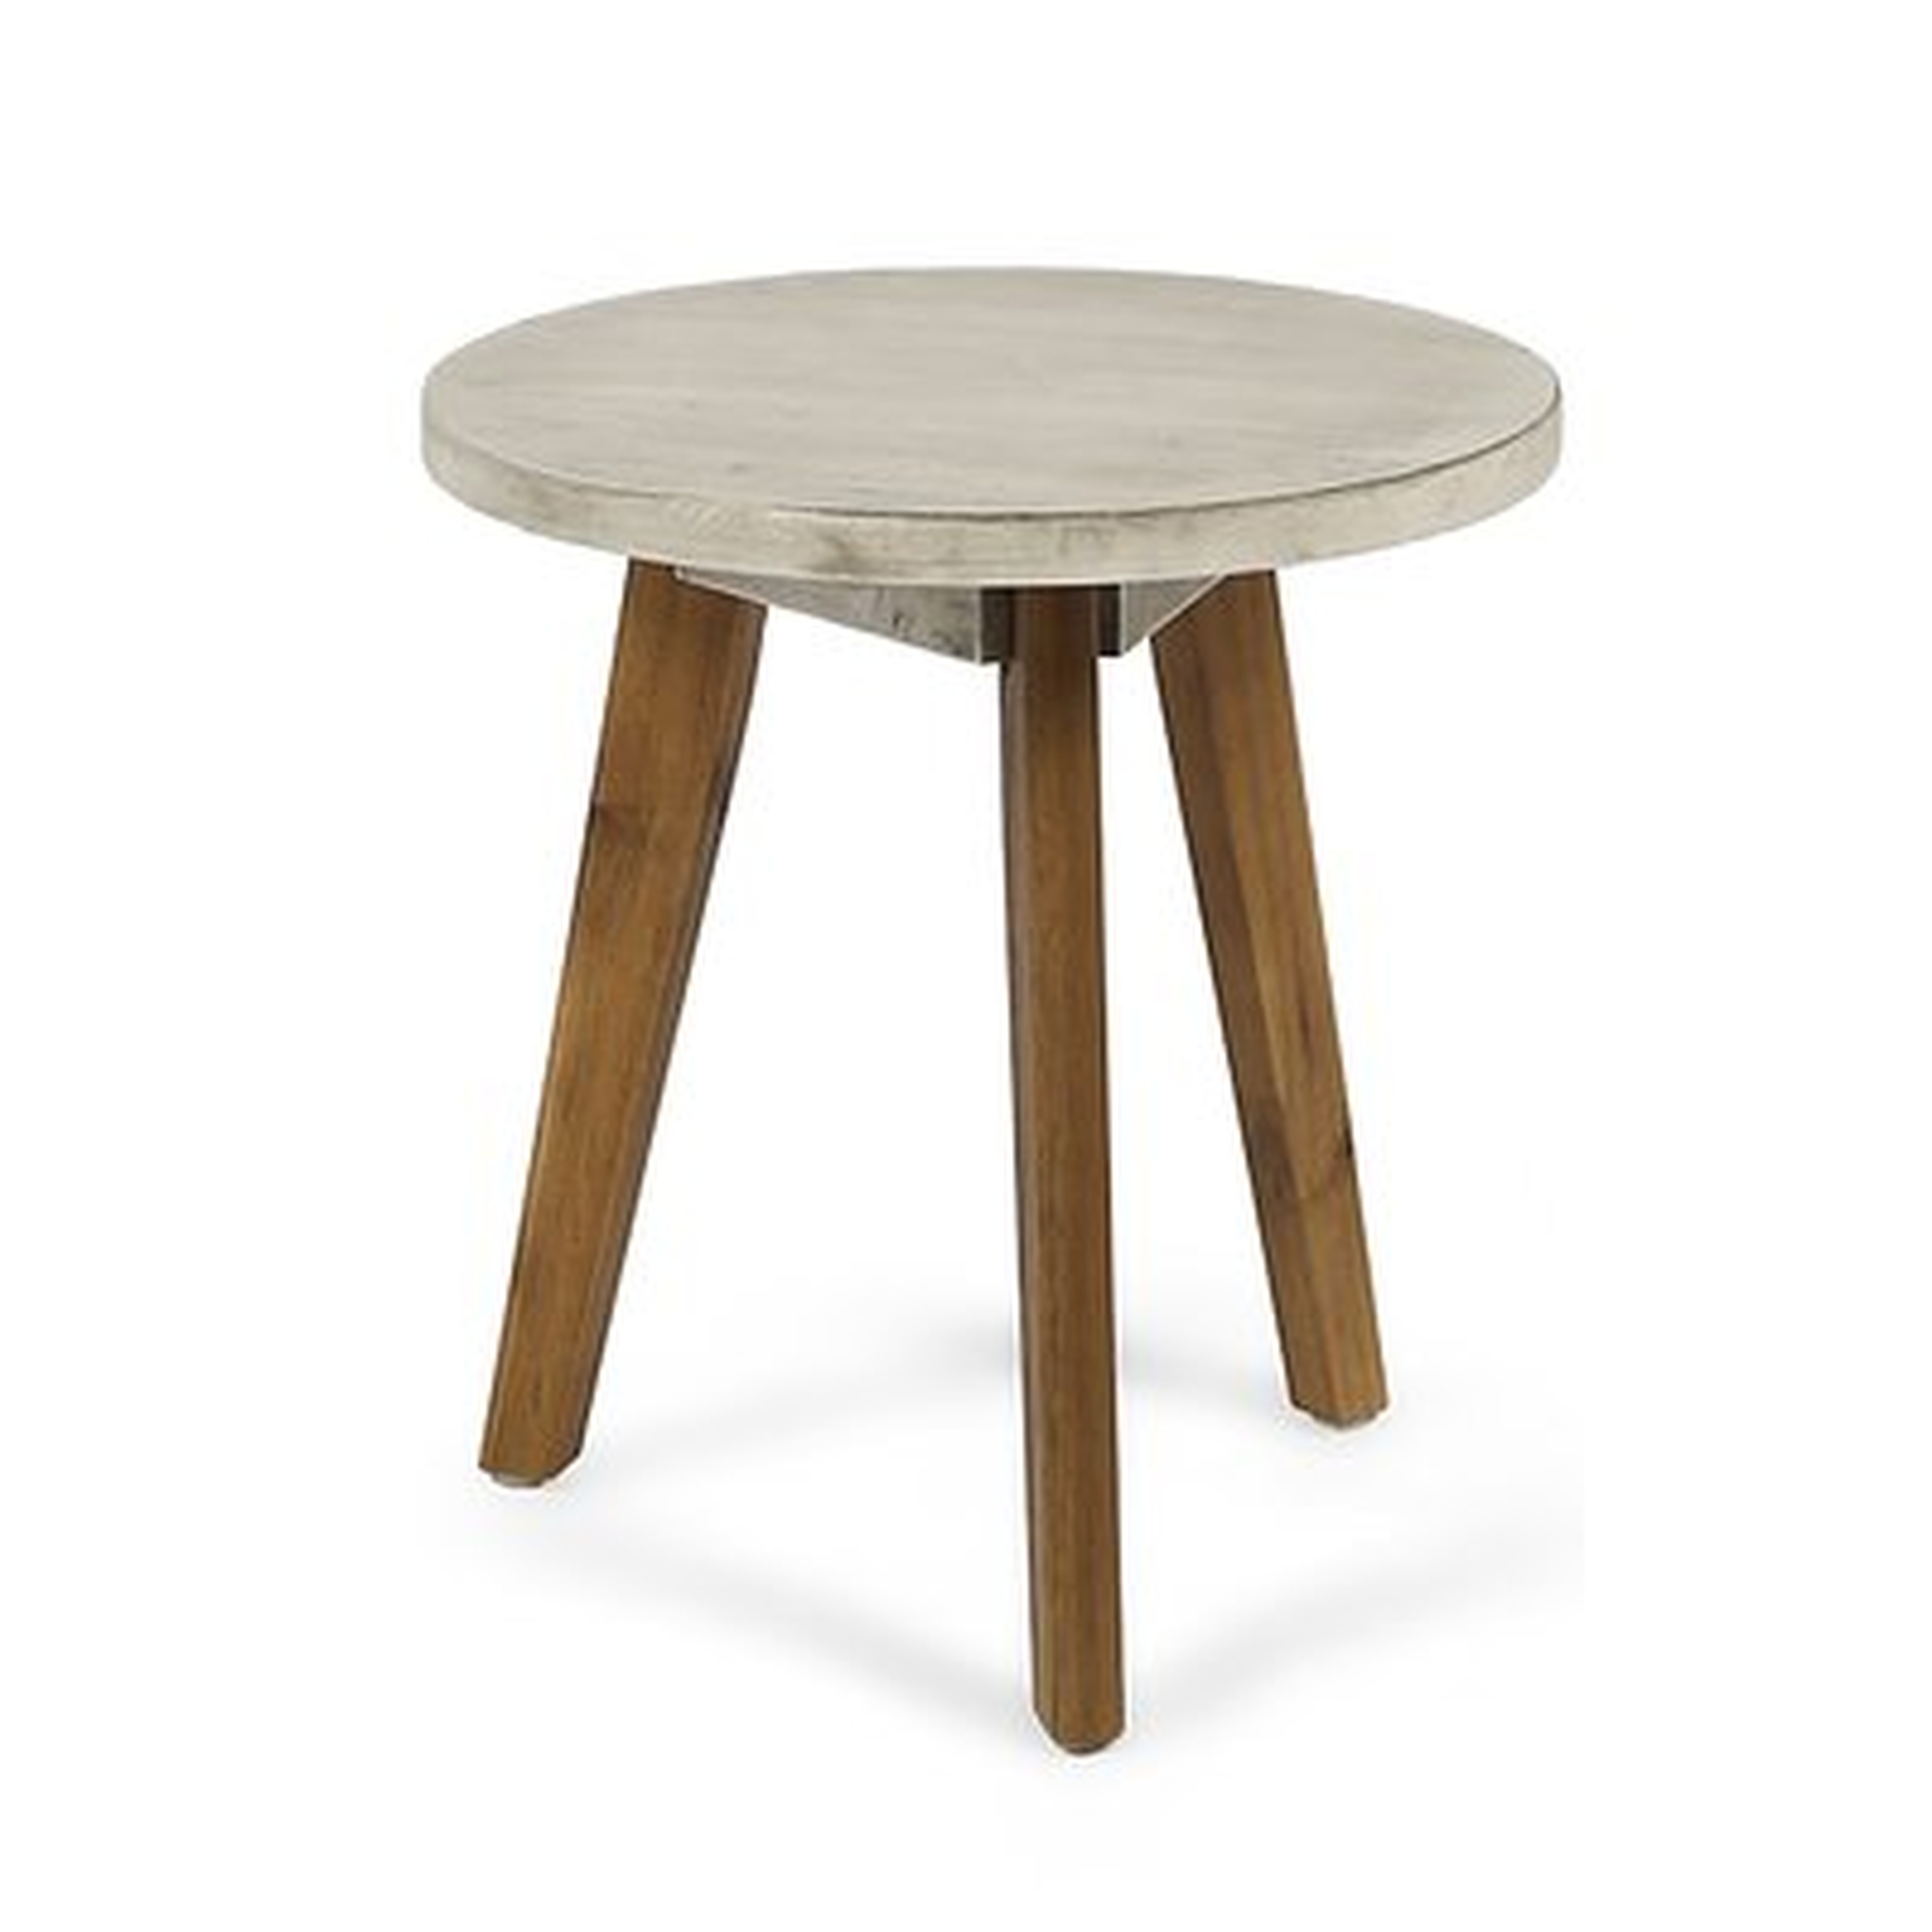 Humphries Solid Wood 3 Legs End Table, Light Gray & Natural - Wayfair